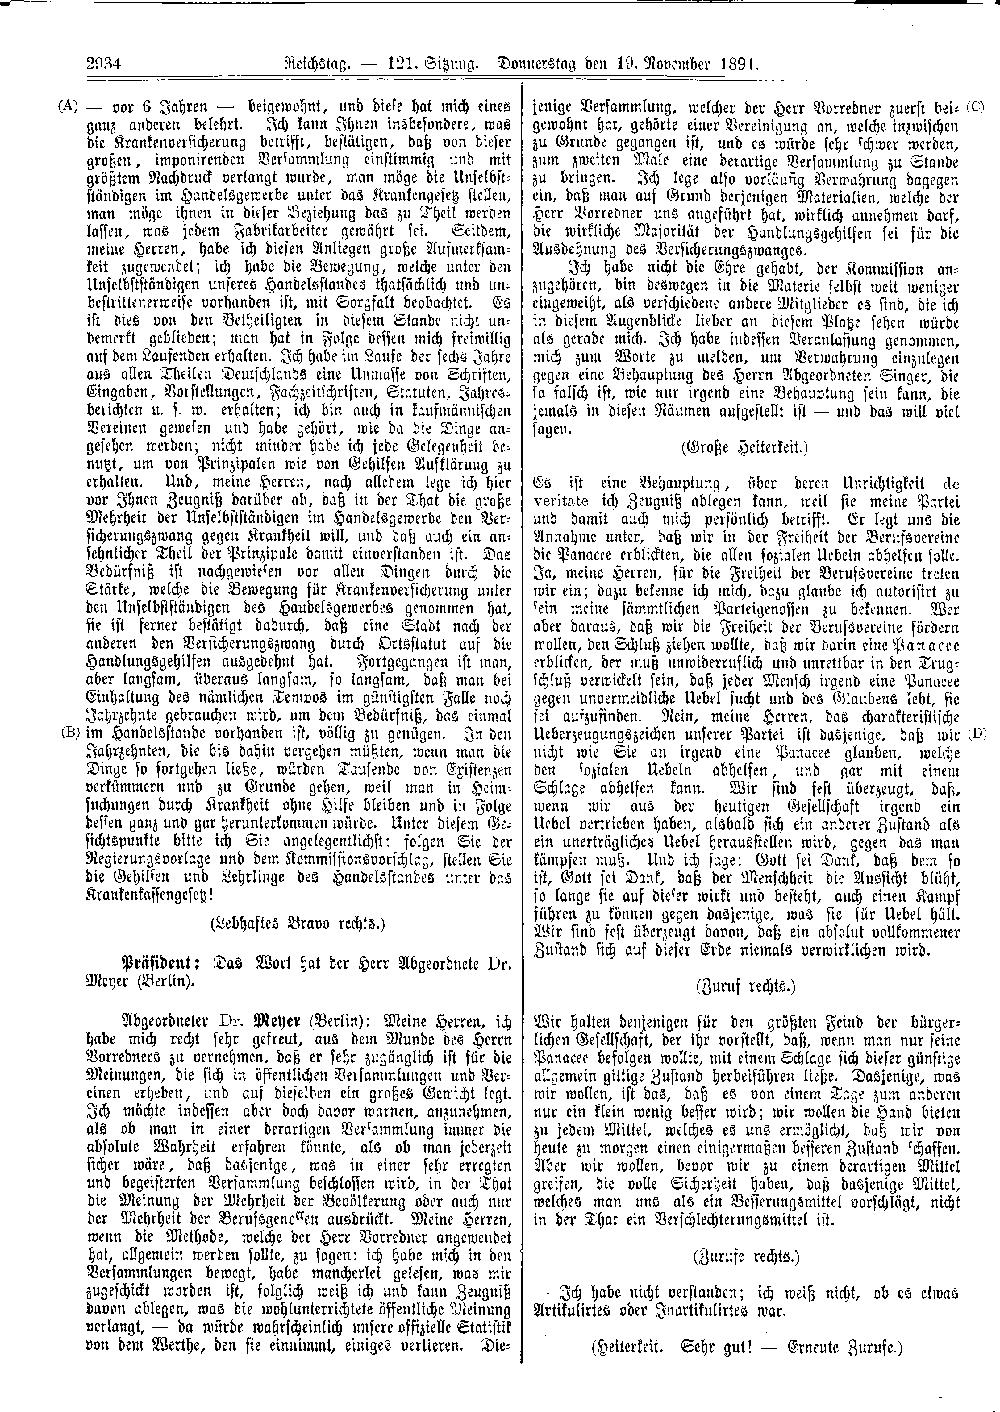 Scan of page 2934